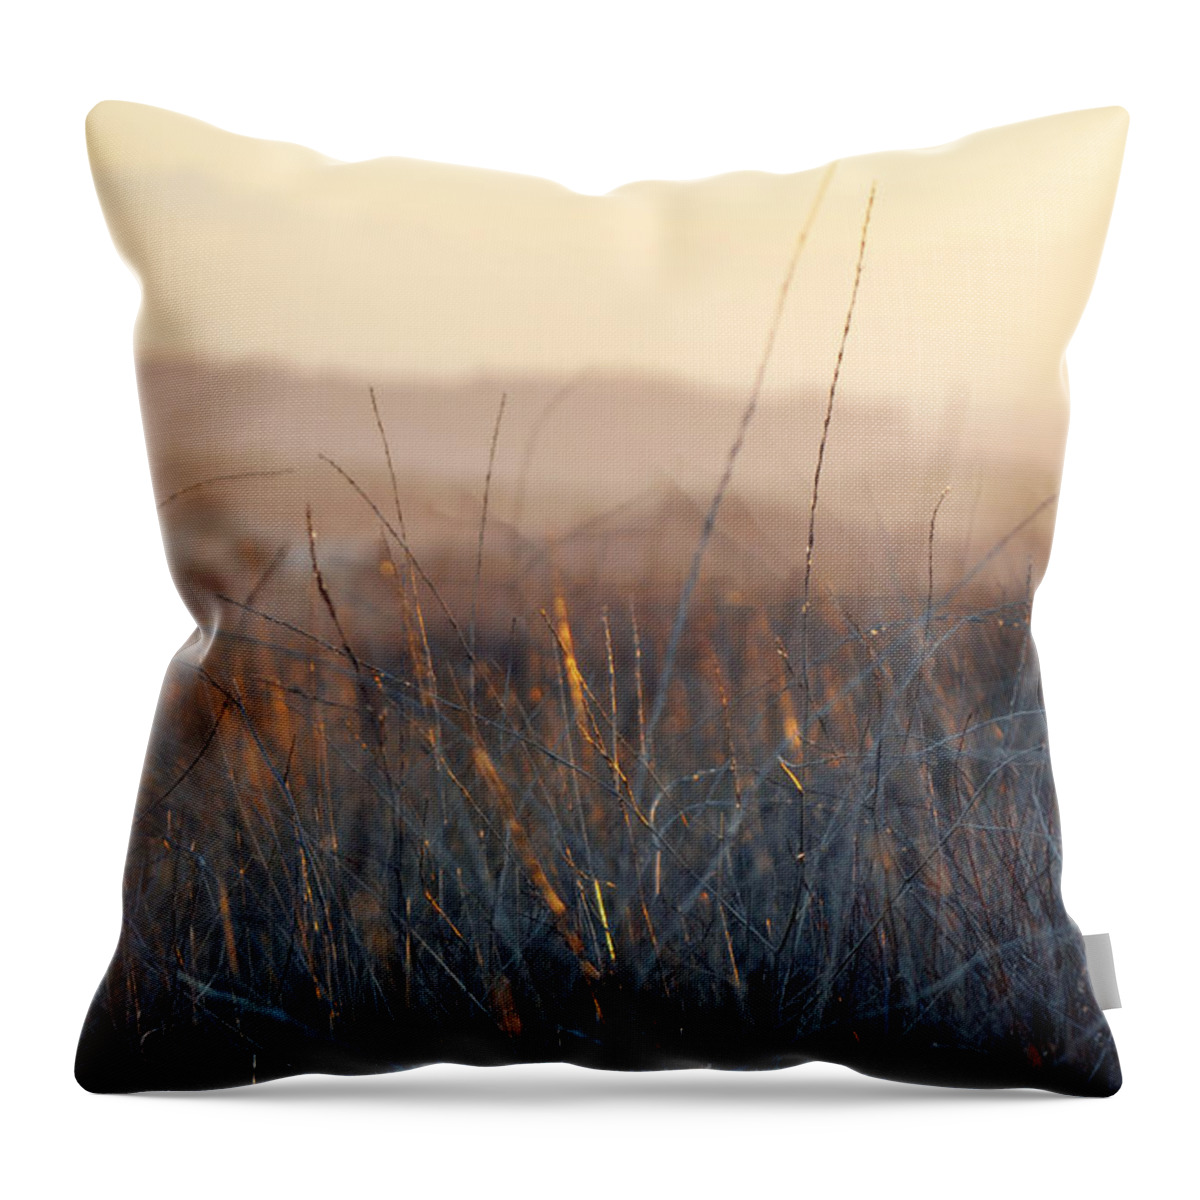 Happy Camp Canyon Throw Pillow featuring the photograph Happy Camp Canyon Magic Hour by Kyle Hanson